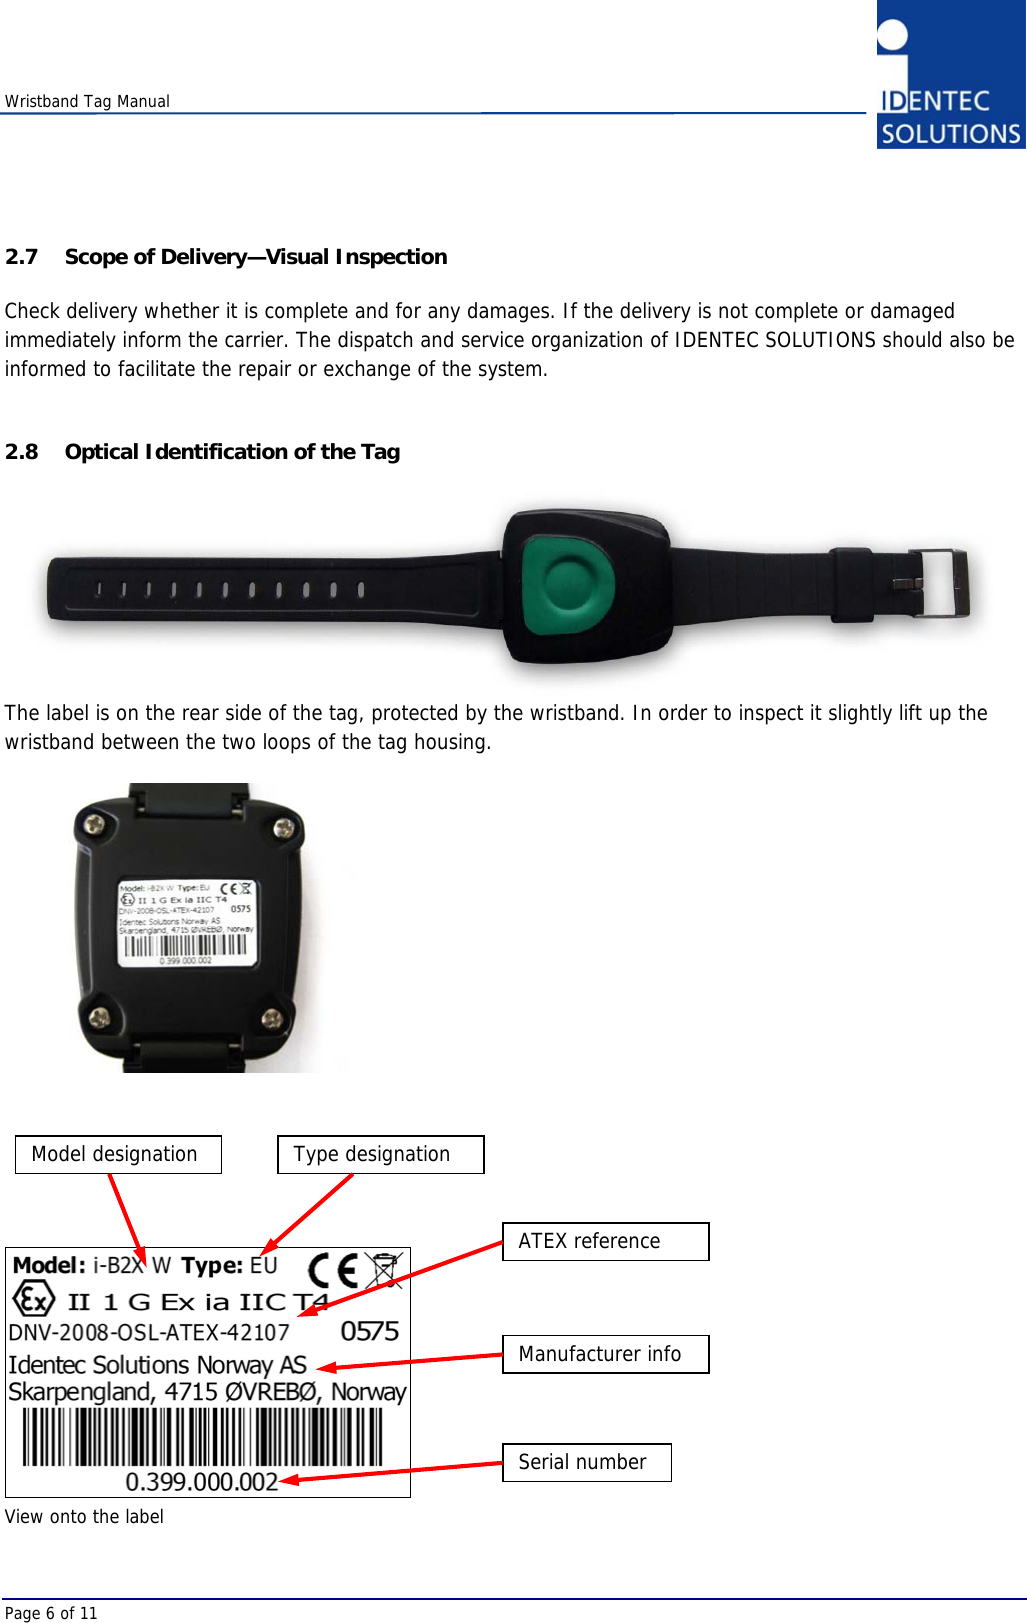    Wristband Tag Manual Page 6 of 11 2.7 Scope of Delivery—Visual Inspection Check delivery whether it is complete and for any damages. If the delivery is not complete or damaged immediately inform the carrier. The dispatch and service organization of IDENTEC SOLUTIONS should also be informed to facilitate the repair or exchange of the system.  2.8 Optical Identification of the Tag  The label is on the rear side of the tag, protected by the wristband. In order to inspect it slightly lift up the wristband between the two loops of the tag housing.          View onto the label  Model designation  Type designation Serial number Manufacturer info ATEX reference 